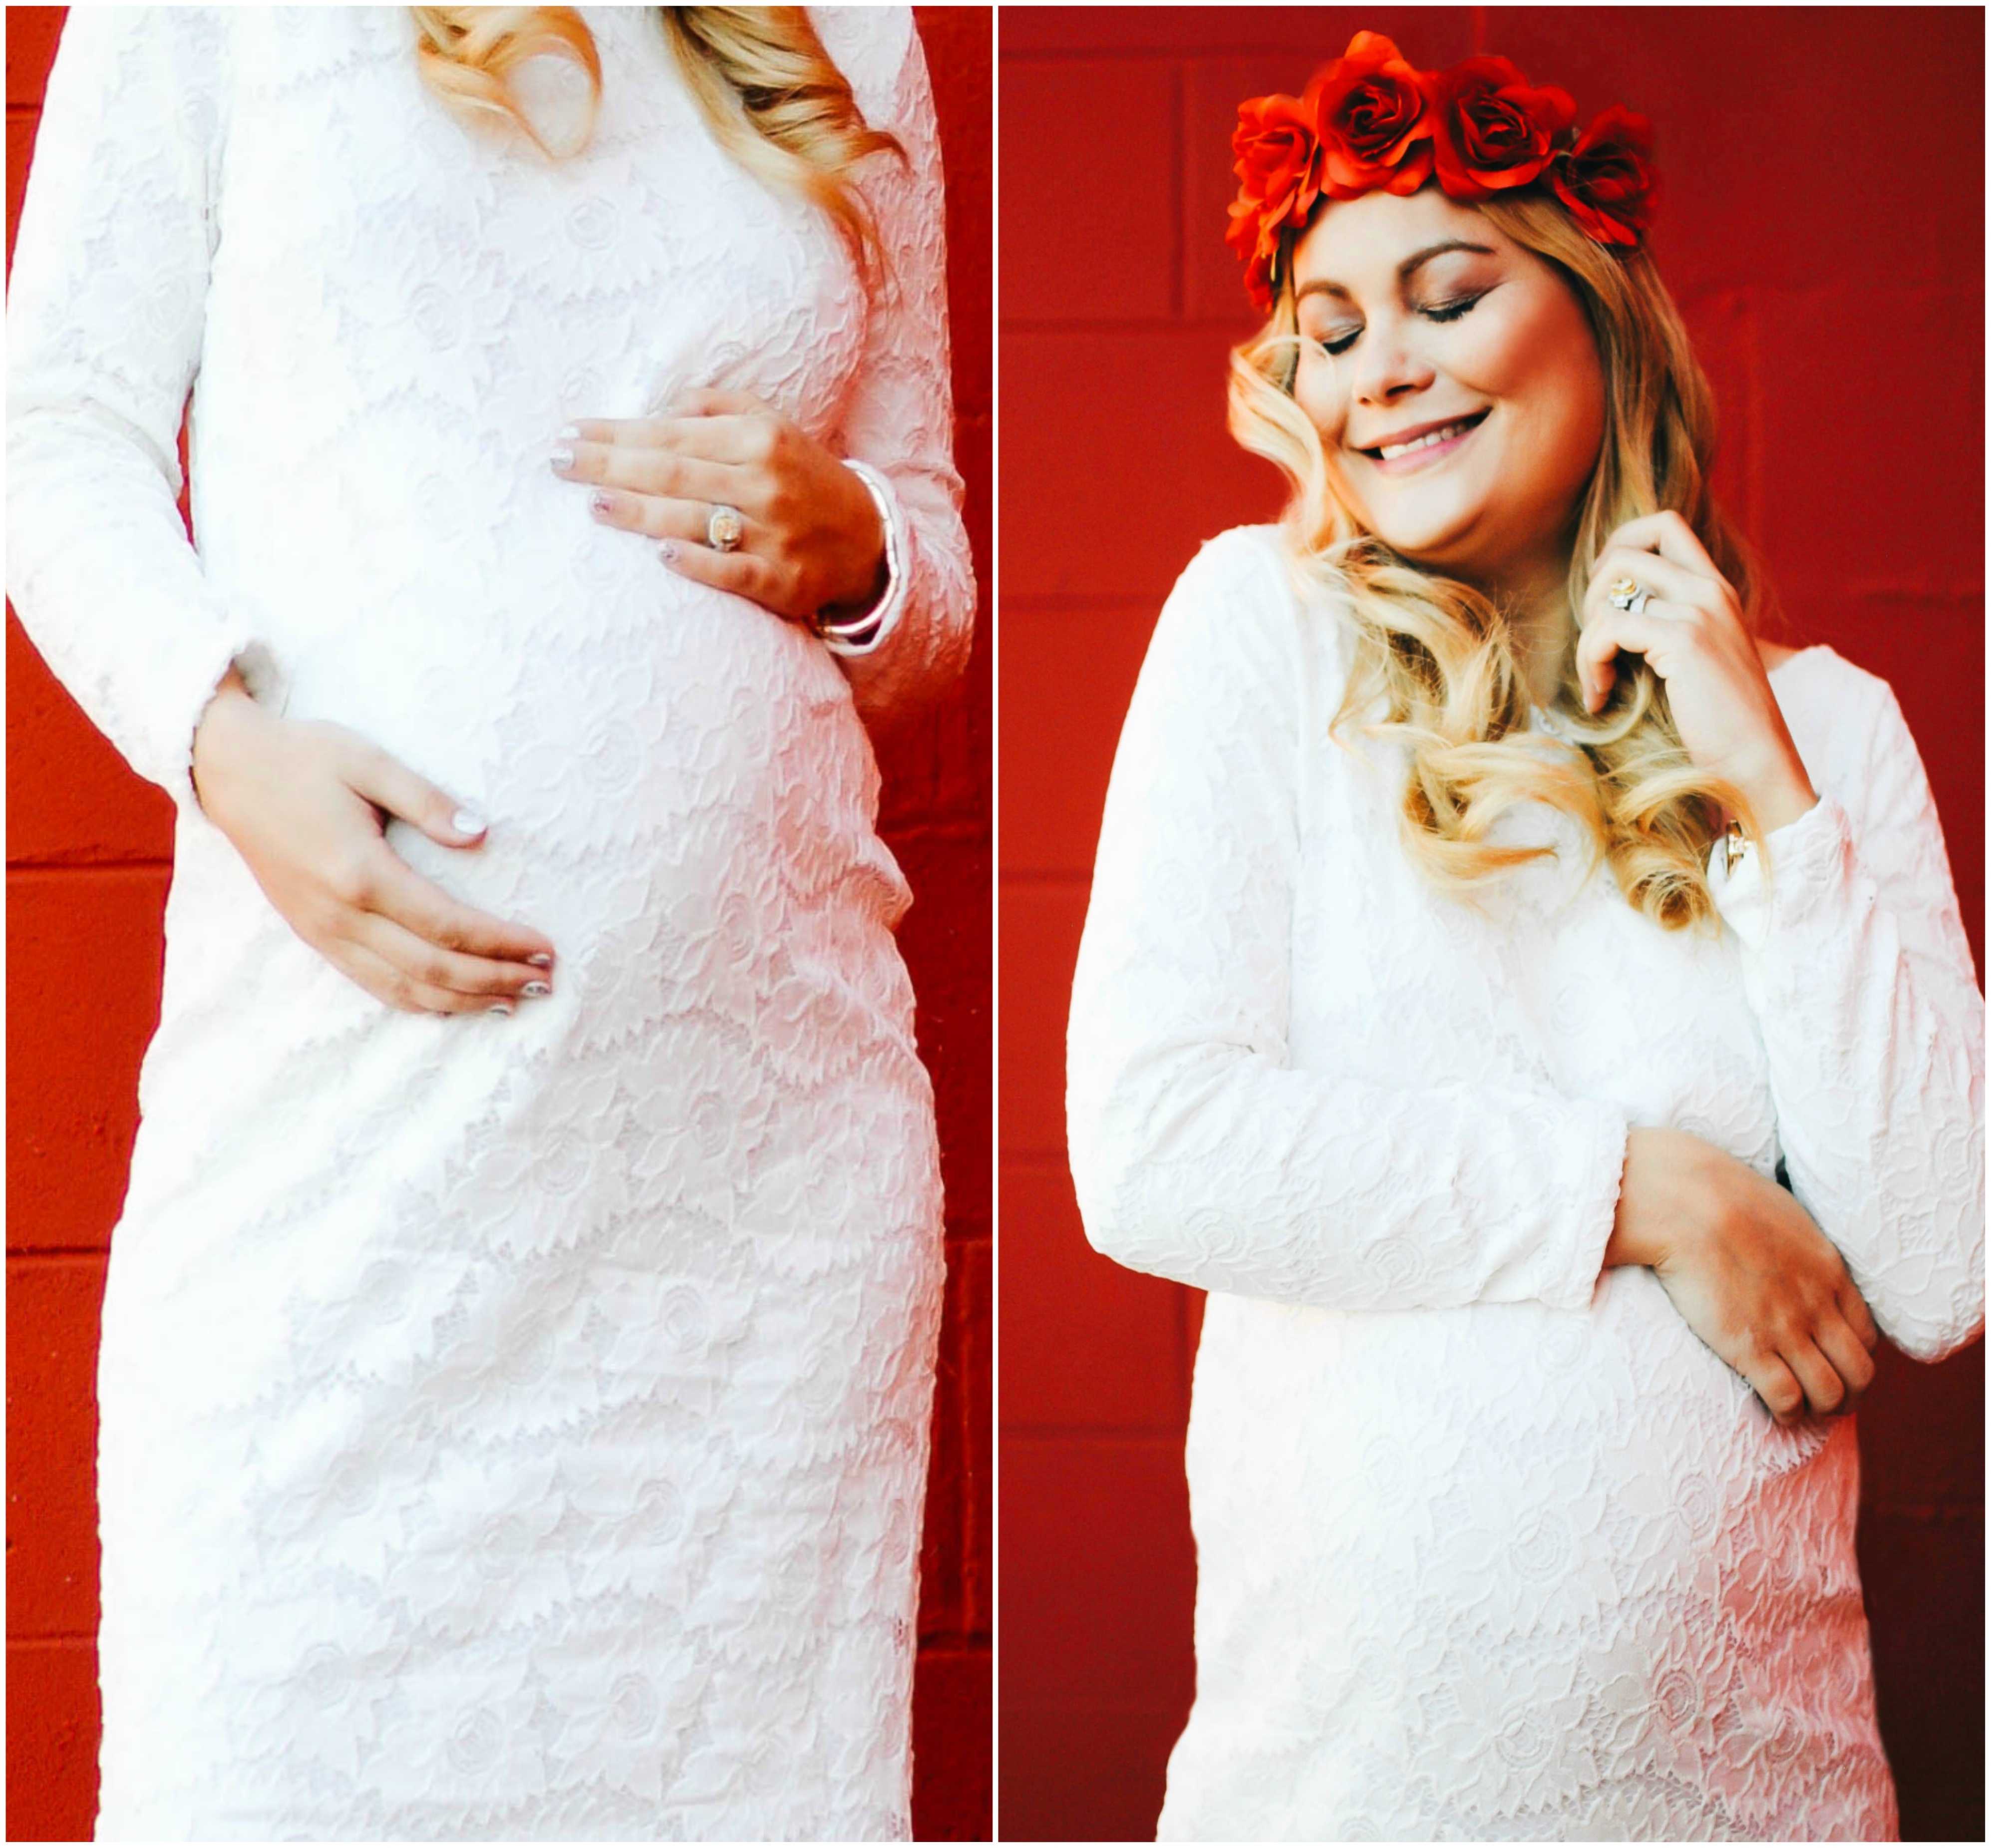 Vanessa Lambert blogger behind What Would V Wear wears a wnite lace maternity dress from Ingrid and Isabel_9